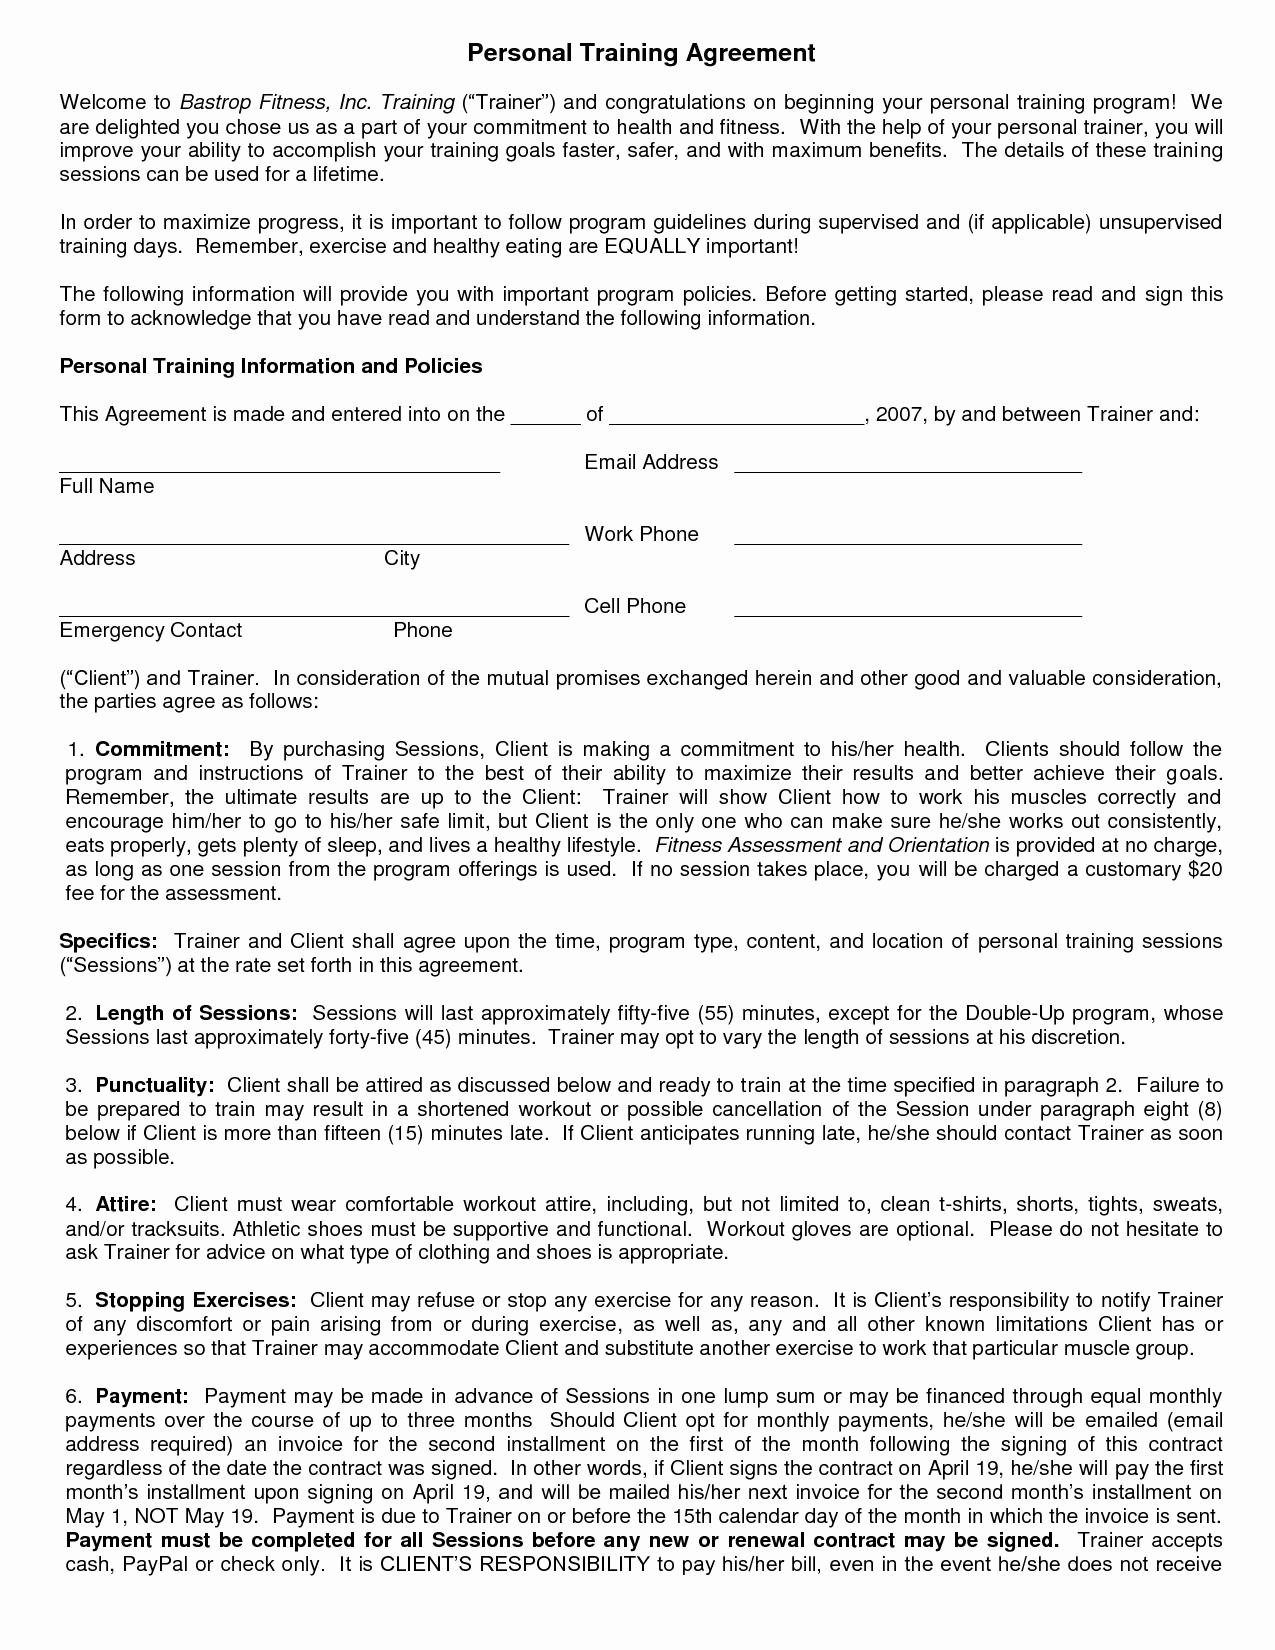 Personal Agreement Template 10 Best Of Personal Contract Agreement Sample Latter Example Template